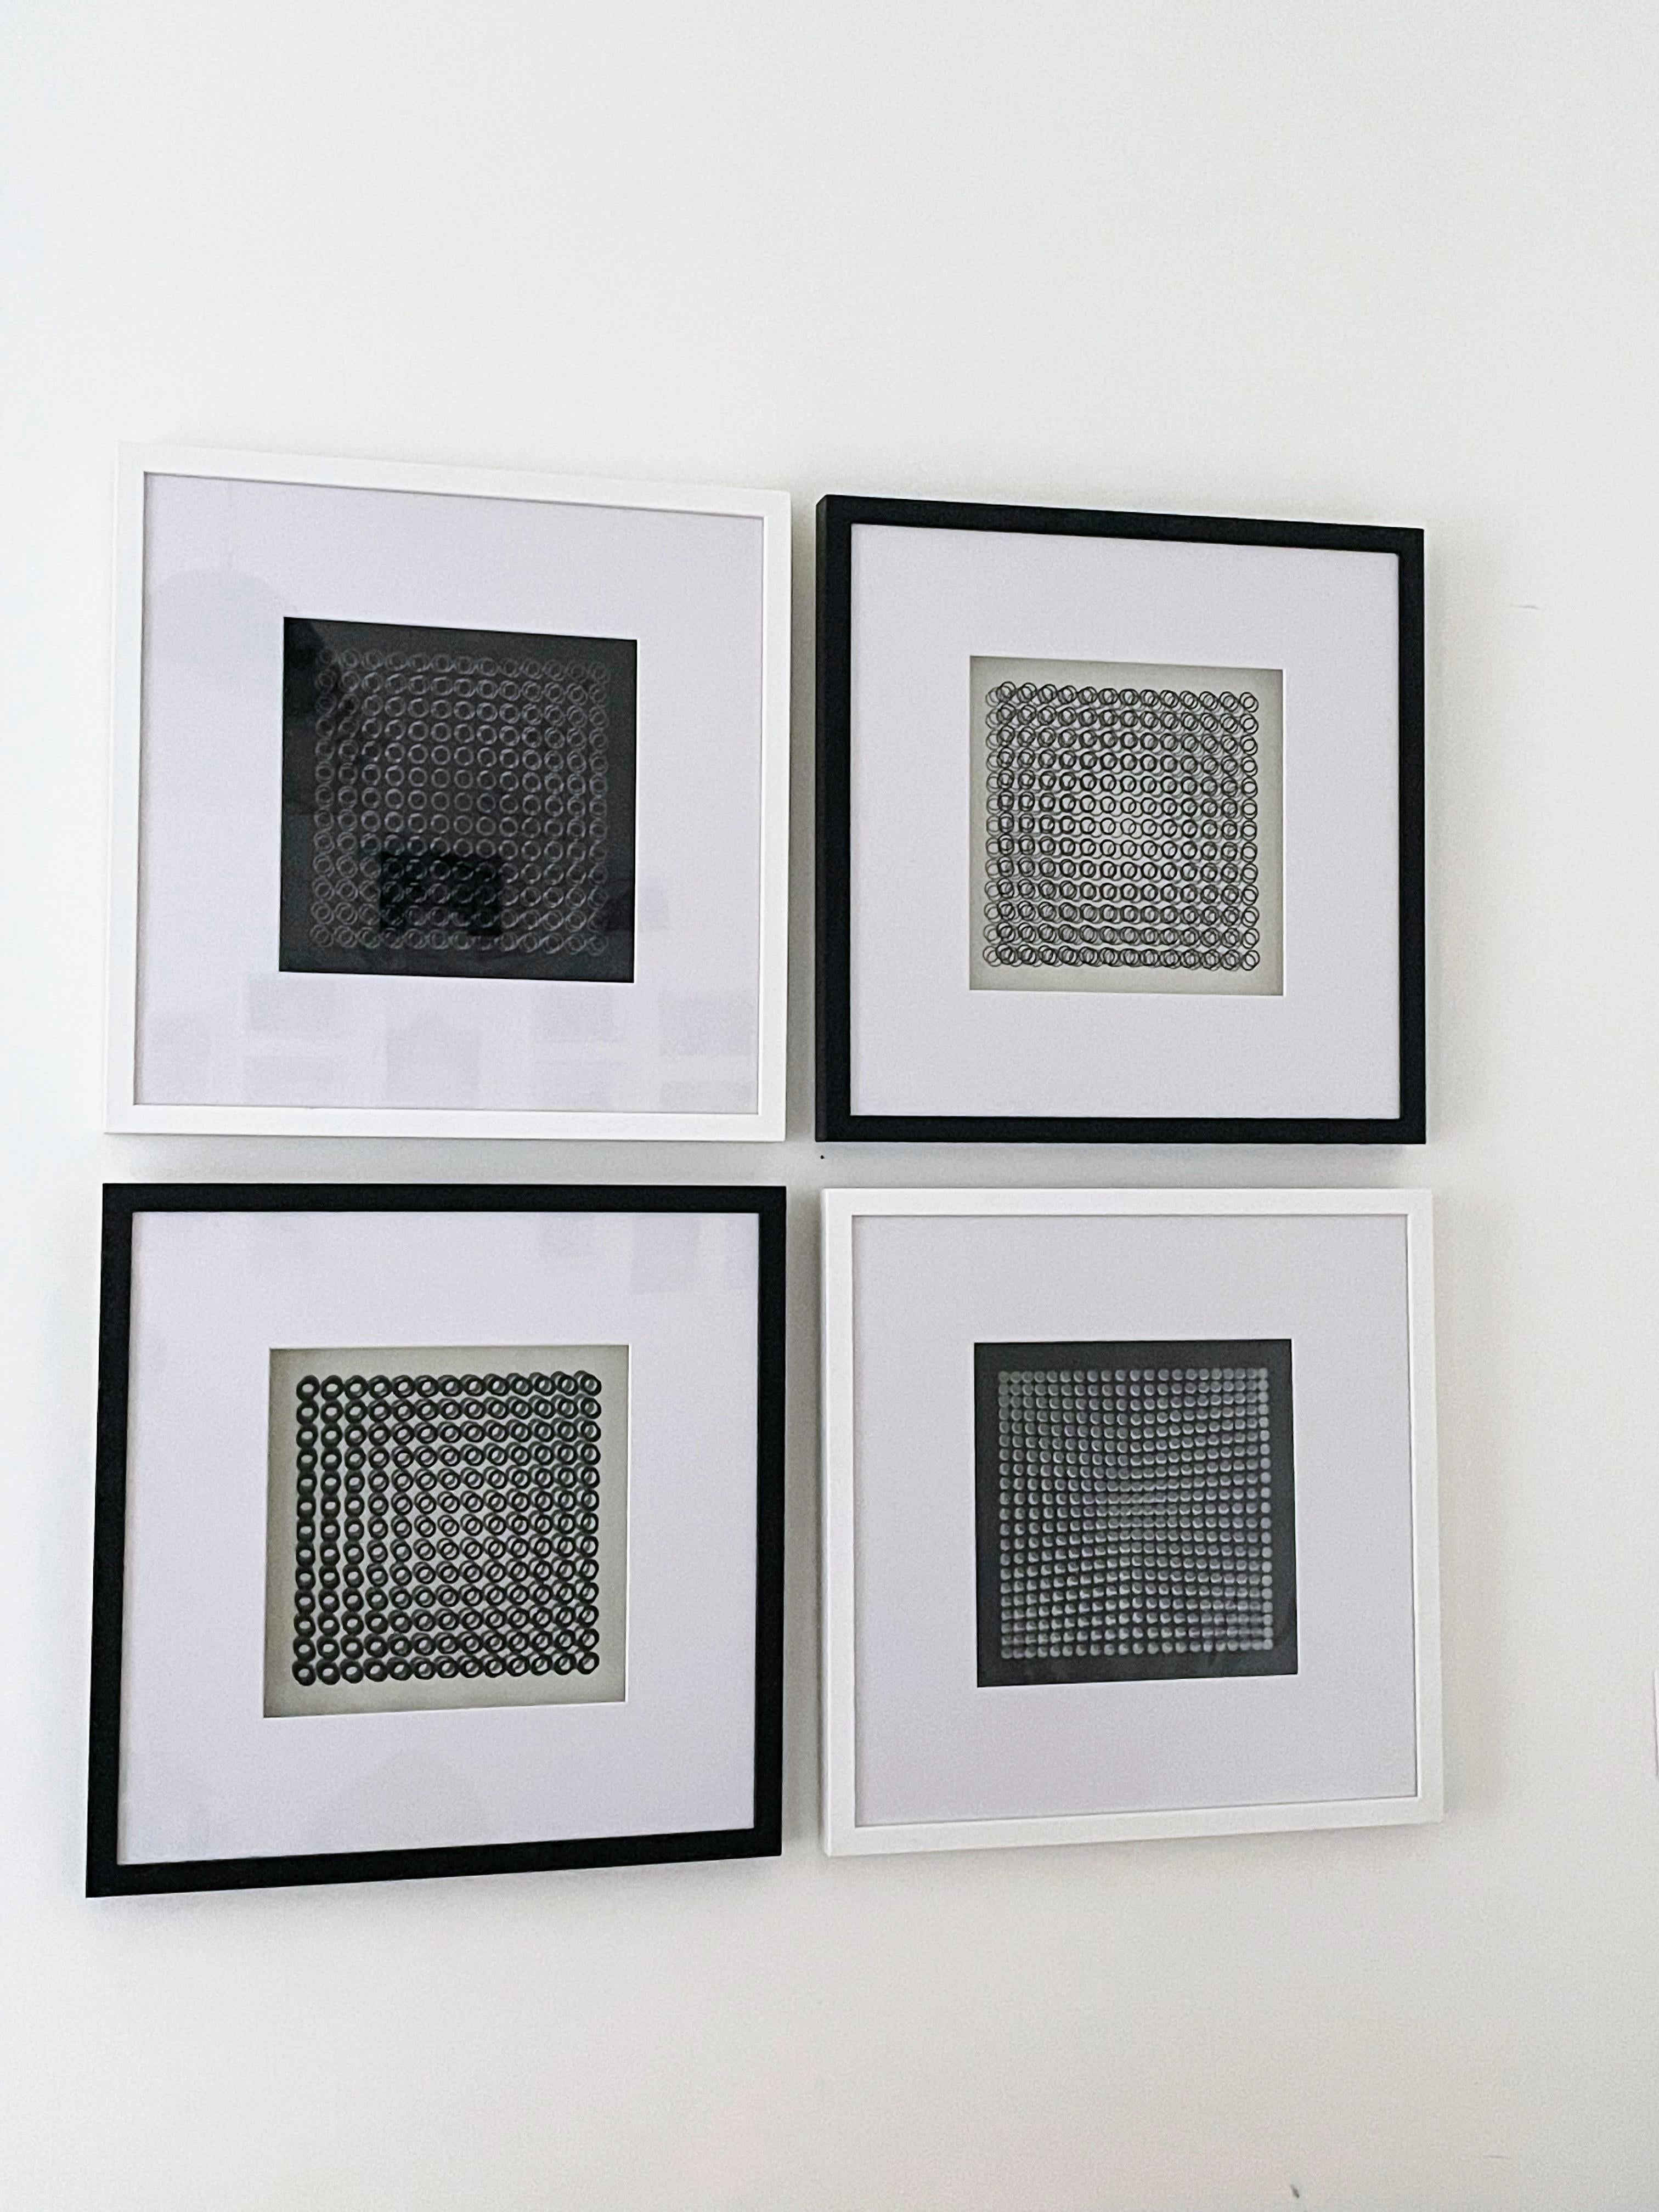 Vasarely prints: OEUVRES PROFONDES.
 Four different op art prints by Victor Vasarely, from his ‘Oeuvres Profondes’ series.
 Editions Du Griffon Neuchâtel, 1973. 
Matt window is 10 inches by 10 inches. 
Serigraphs on a transparent film. 
